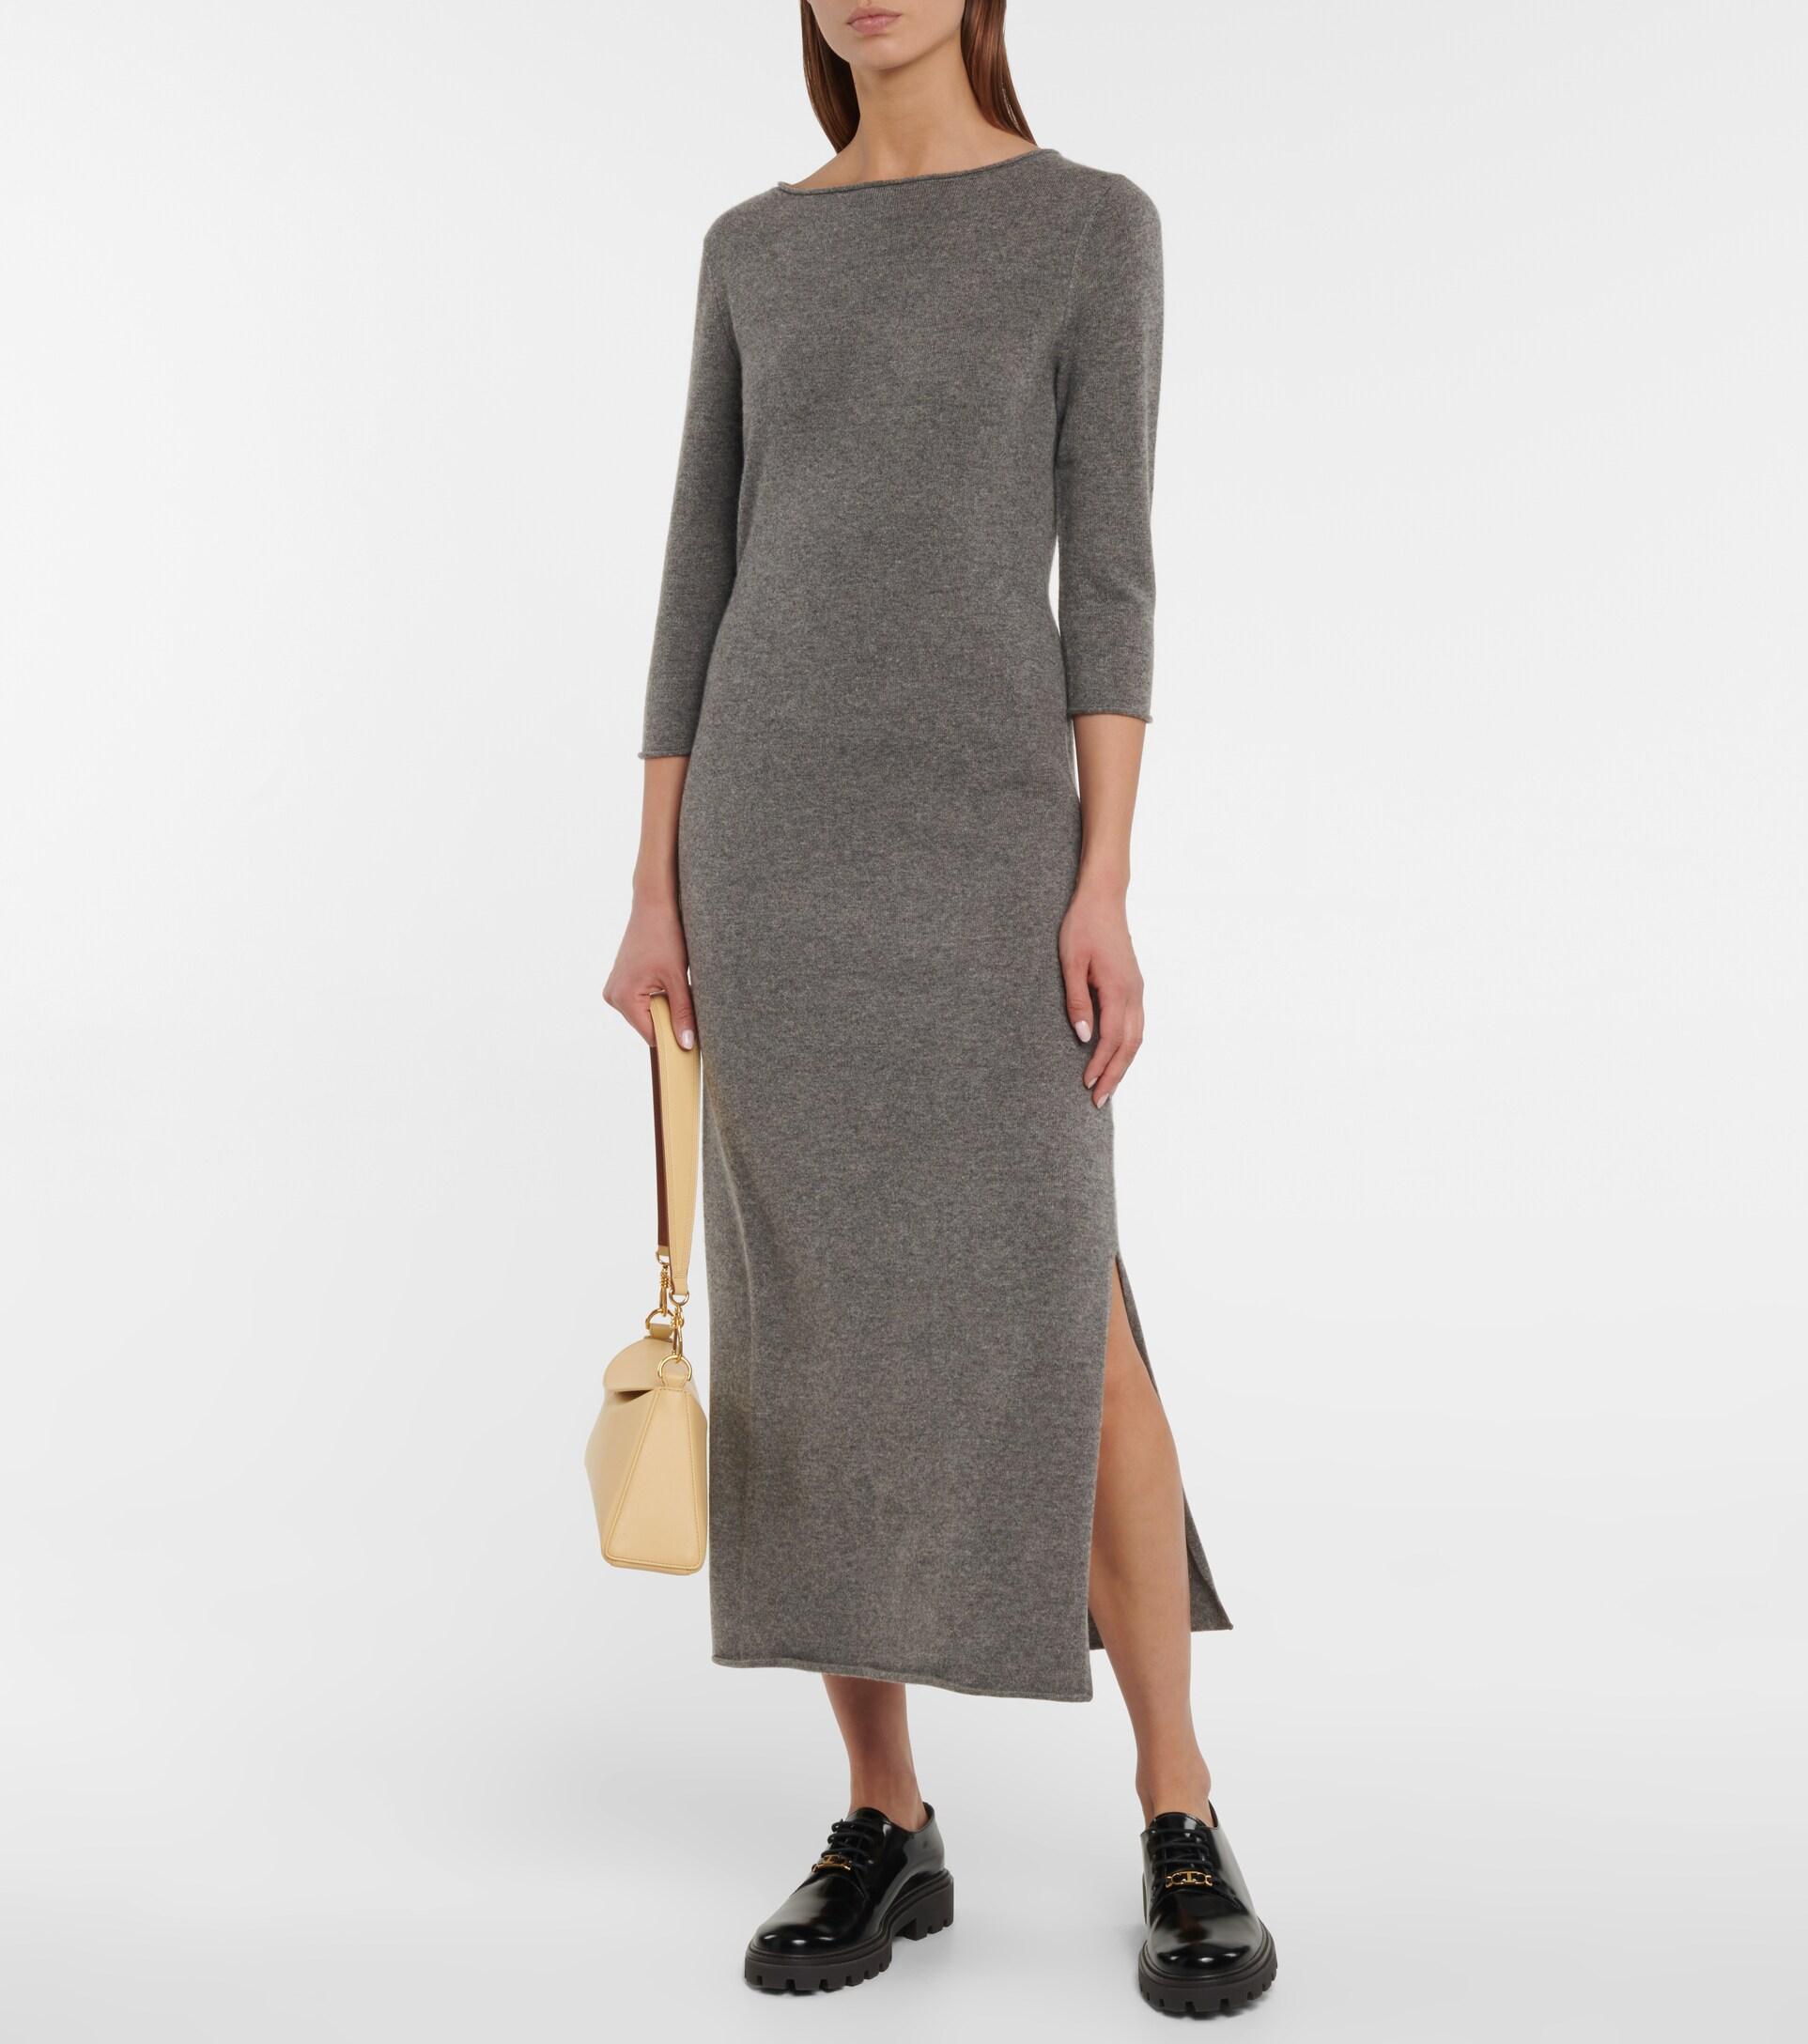 Polo Ralph Lauren Cashmere Sweater Dress in Antique Heather (Gray) | Lyst